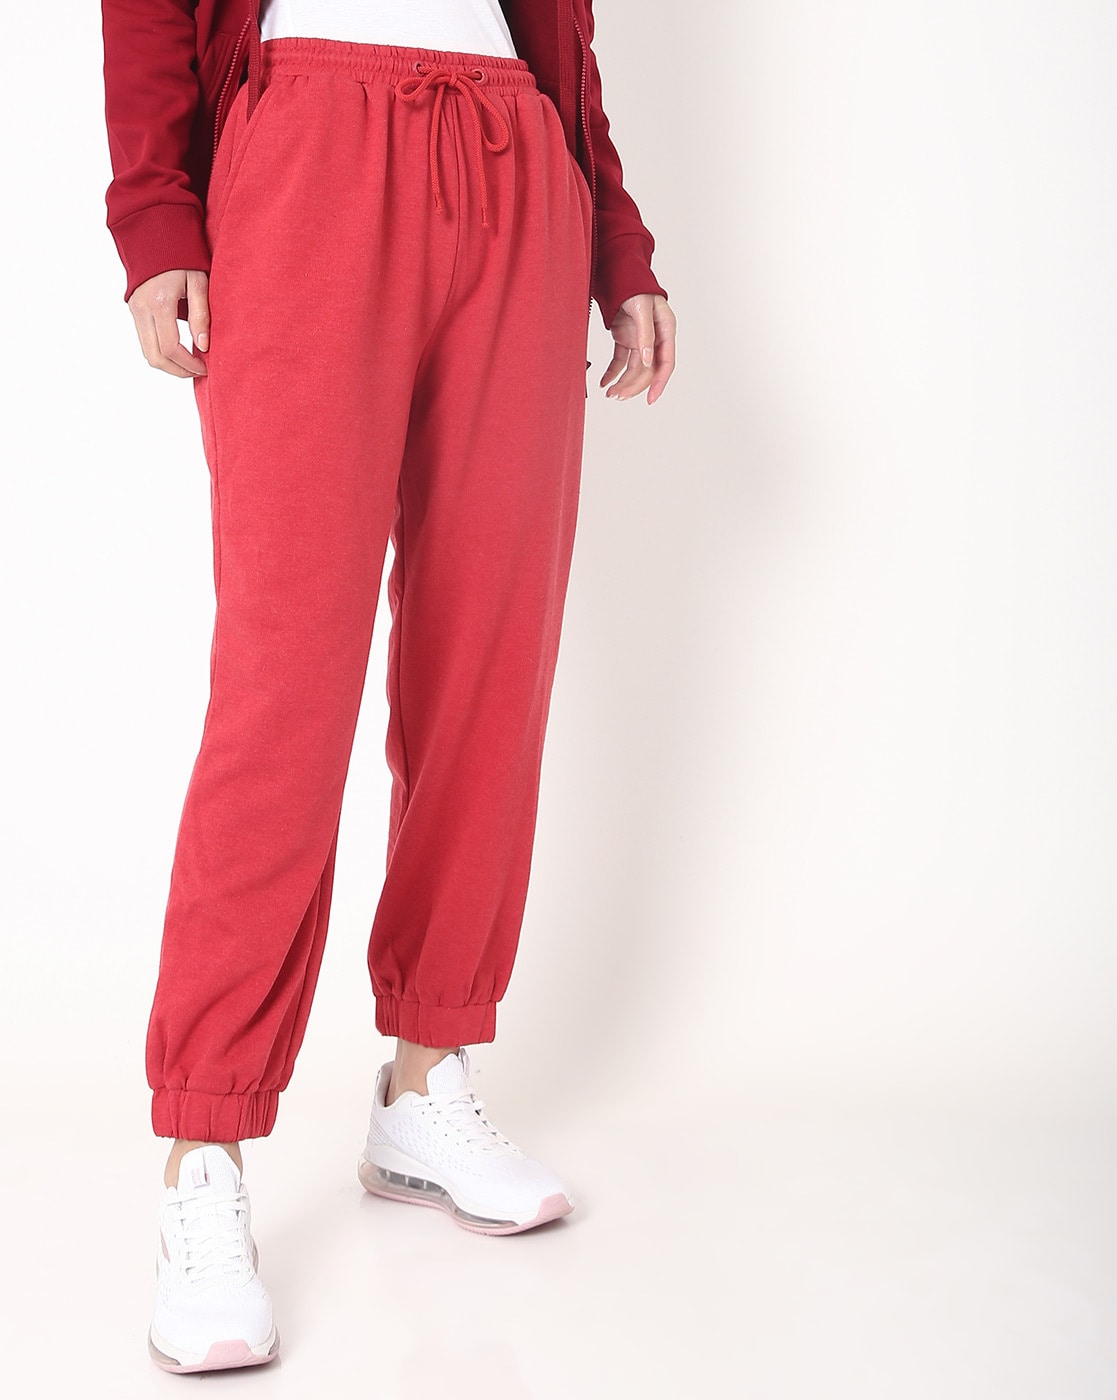 Buy Red Track Pants for Women by Femella Online